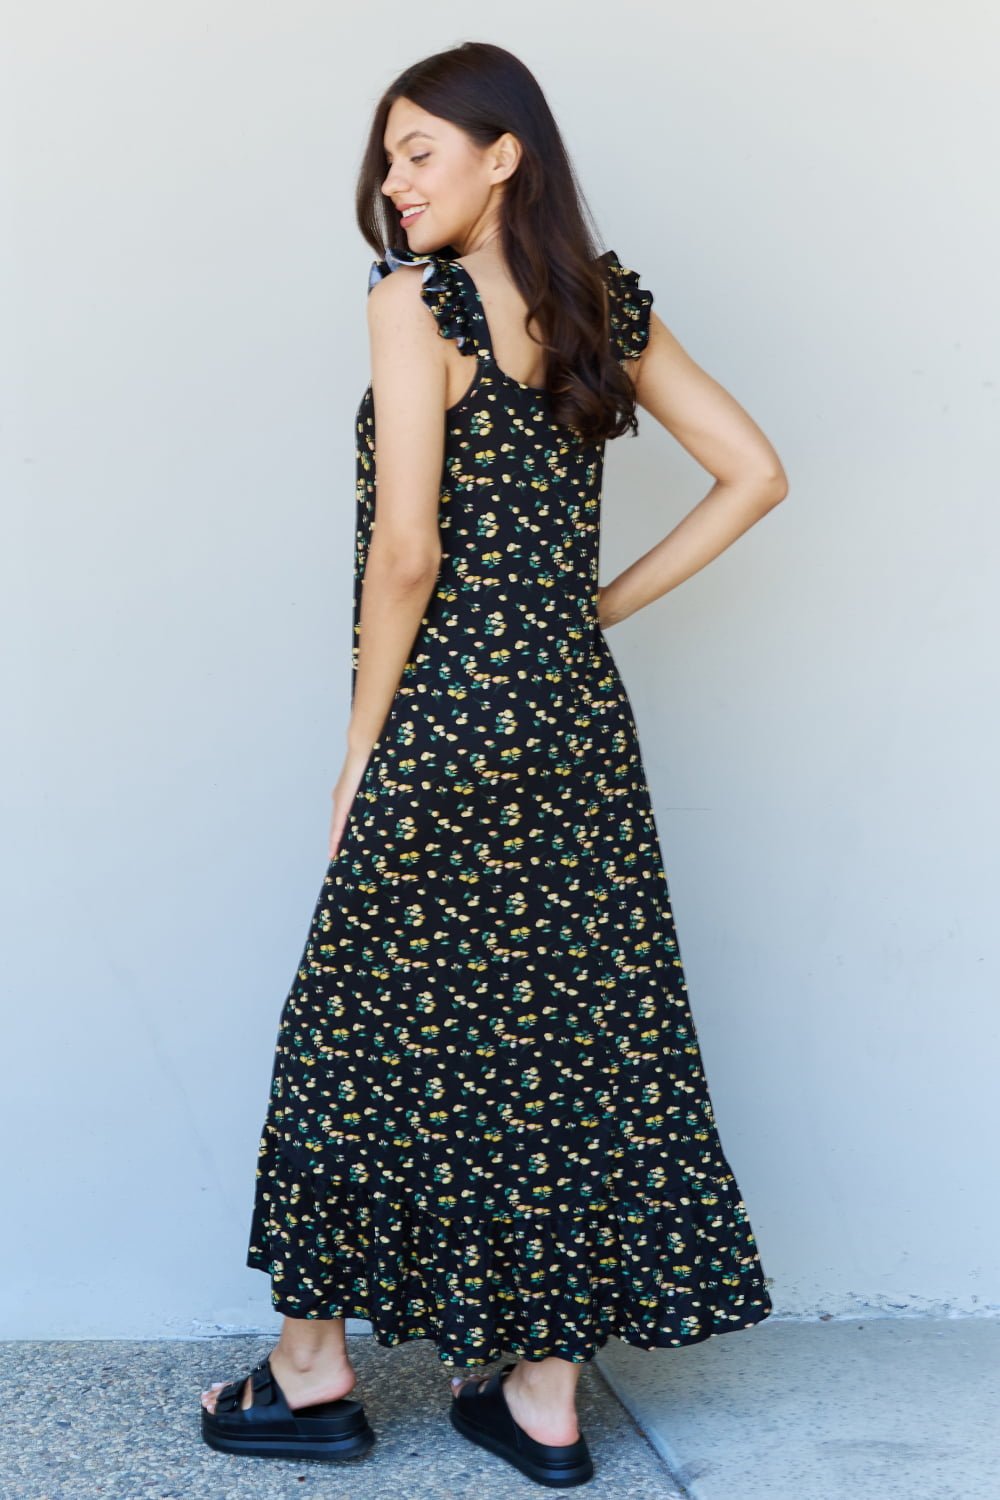 Ruffle Floral Maxi Dress in Black Yellow Floral - Muses Of Bohemia